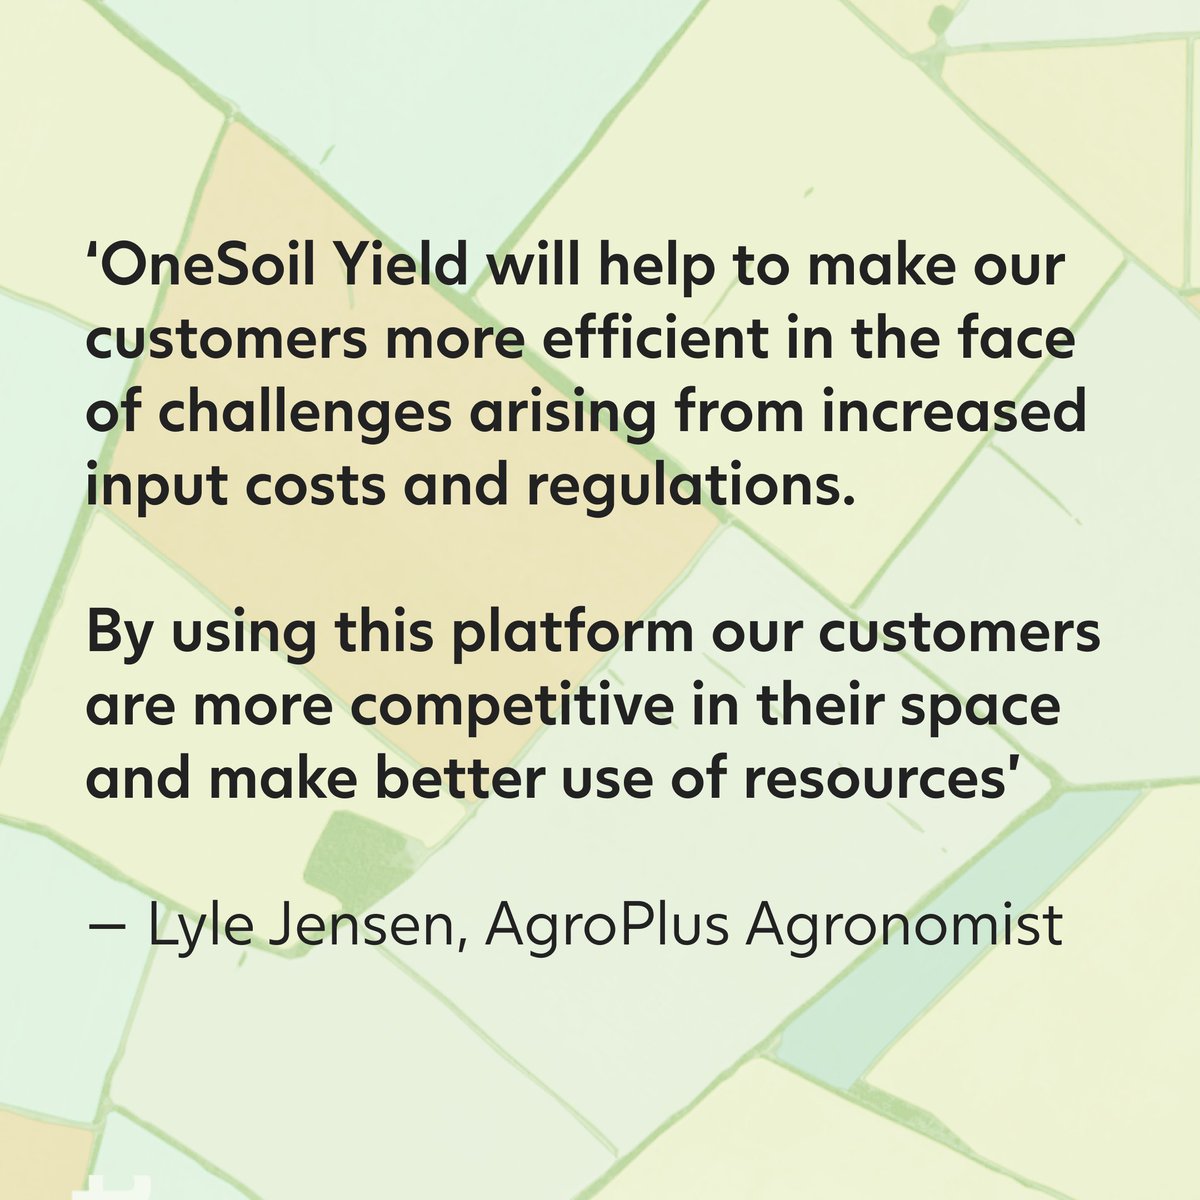 We are honored to announce our new partnership with AgroPlus — new dealer of OneSoil Yield platform in Canada! 🇨🇦 @LyleJensen6 @HoldingsAgro @AgroPlusSolns @Agroplus5 @AgroPlusLeth 🌱 Want to join our dealer network? Apply now: bit.ly/3FGbr9Q